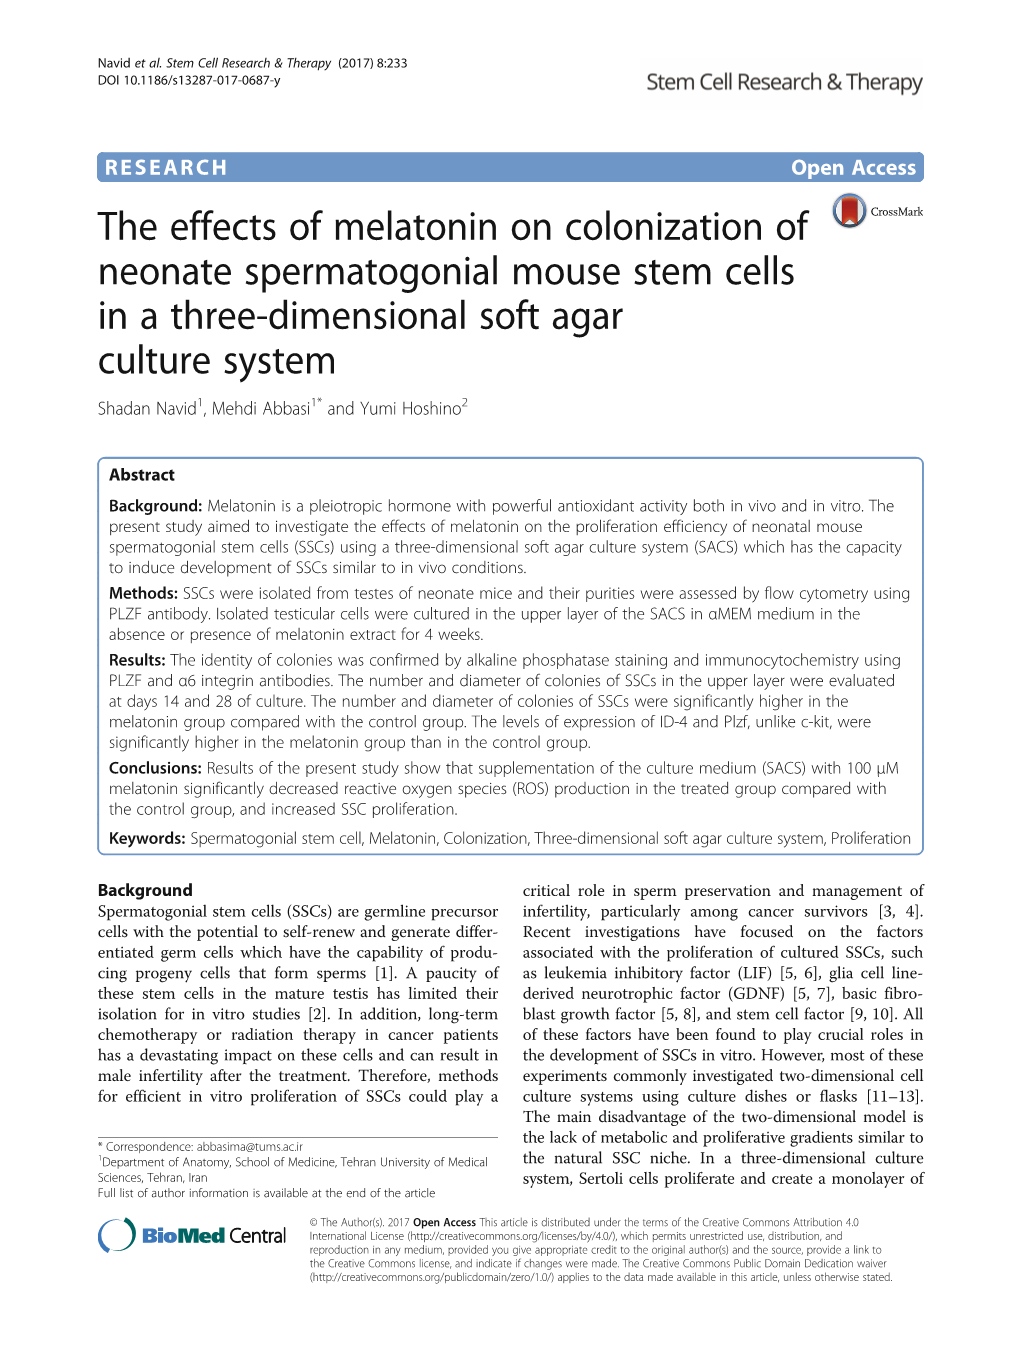 The Effects of Melatonin on Colonization of Neonate Spermatogonial Mouse Stem Cells in a Three-Dimensional Soft Agar Culture